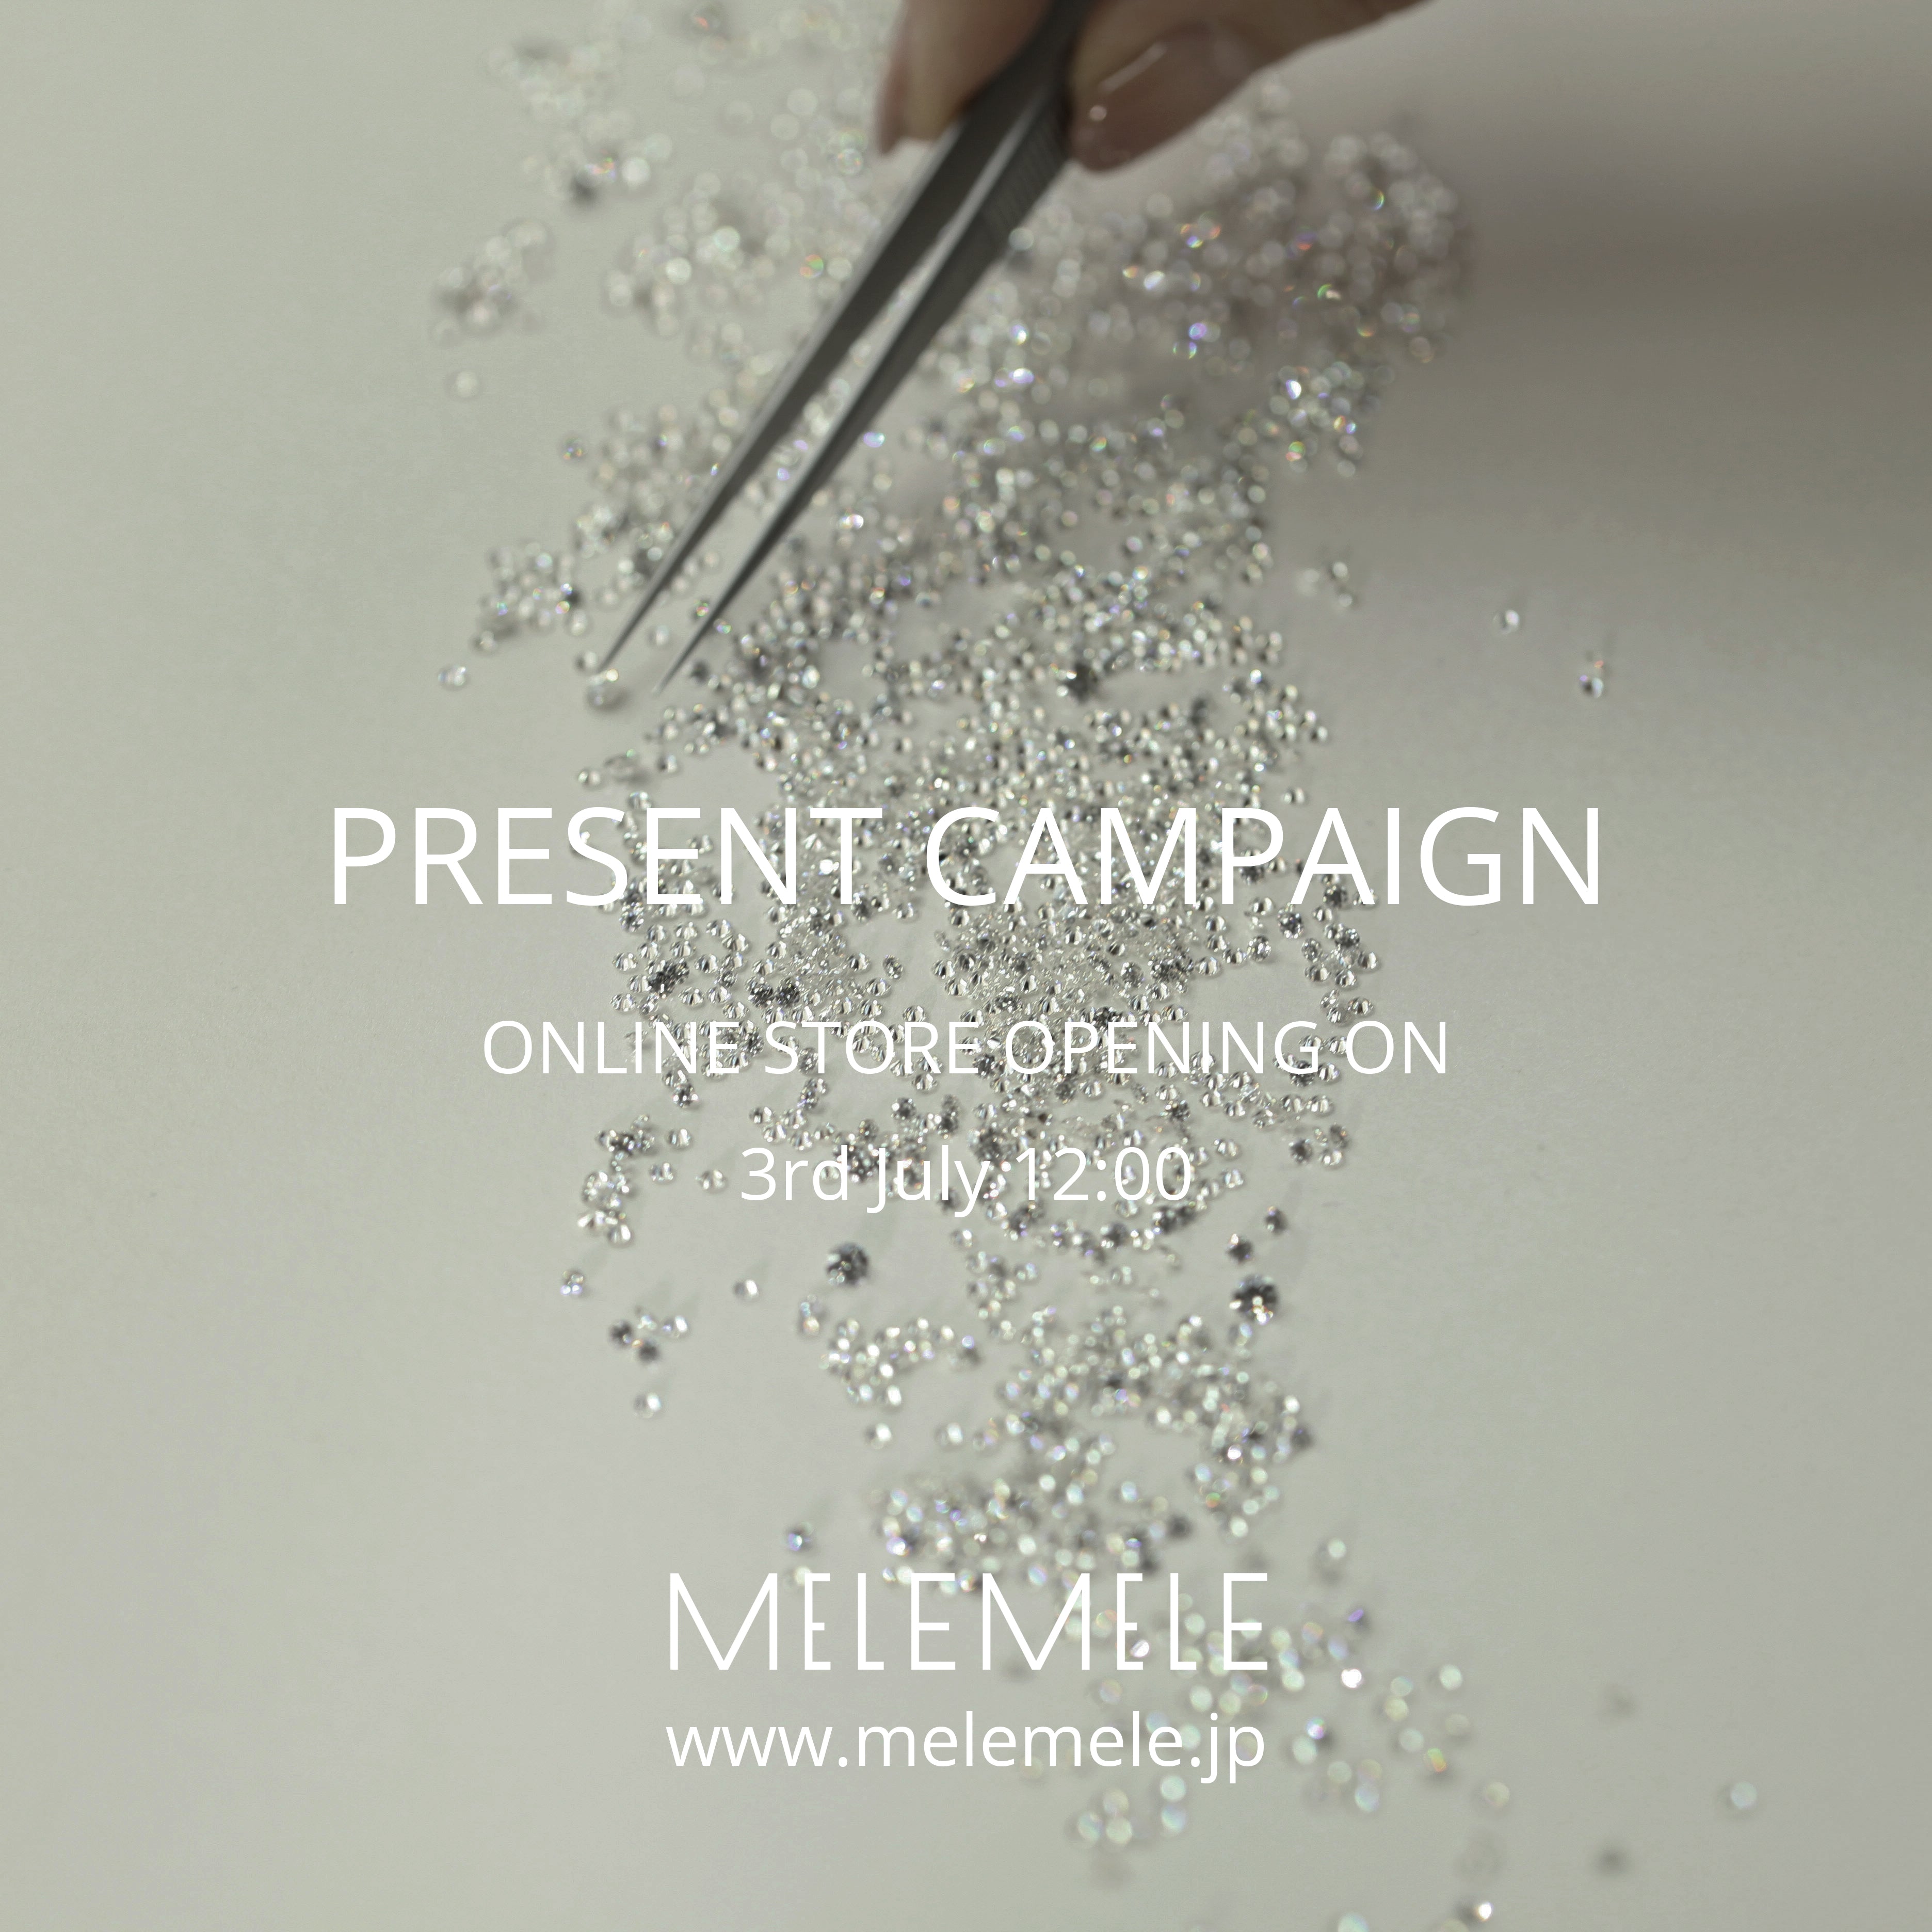 MELE MELE Online Store Opening Campaign